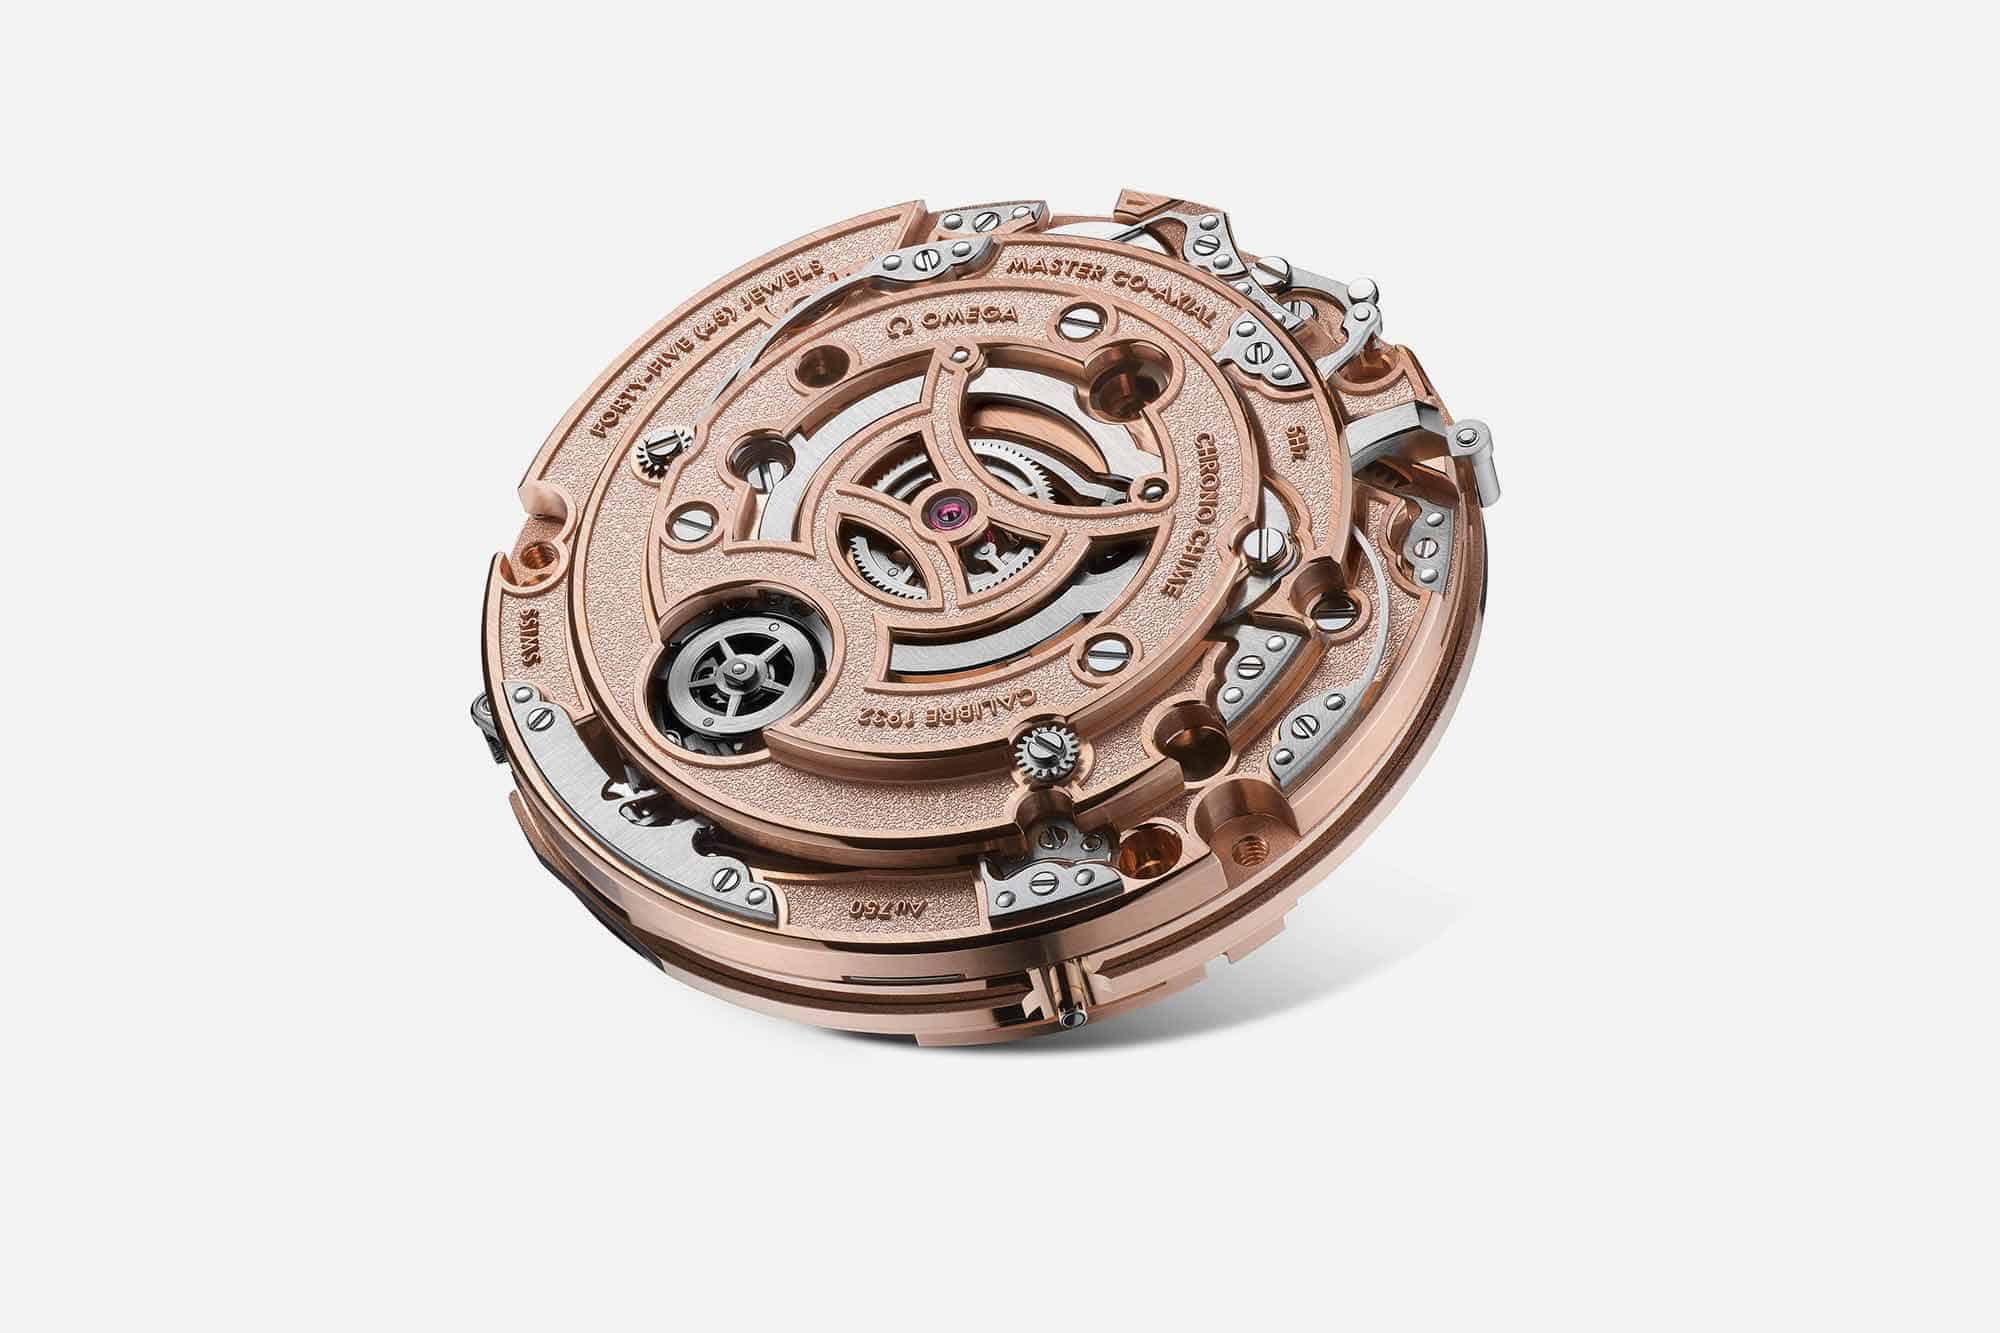 Assembling the most complicated @omega ever made. The Chrono Chime